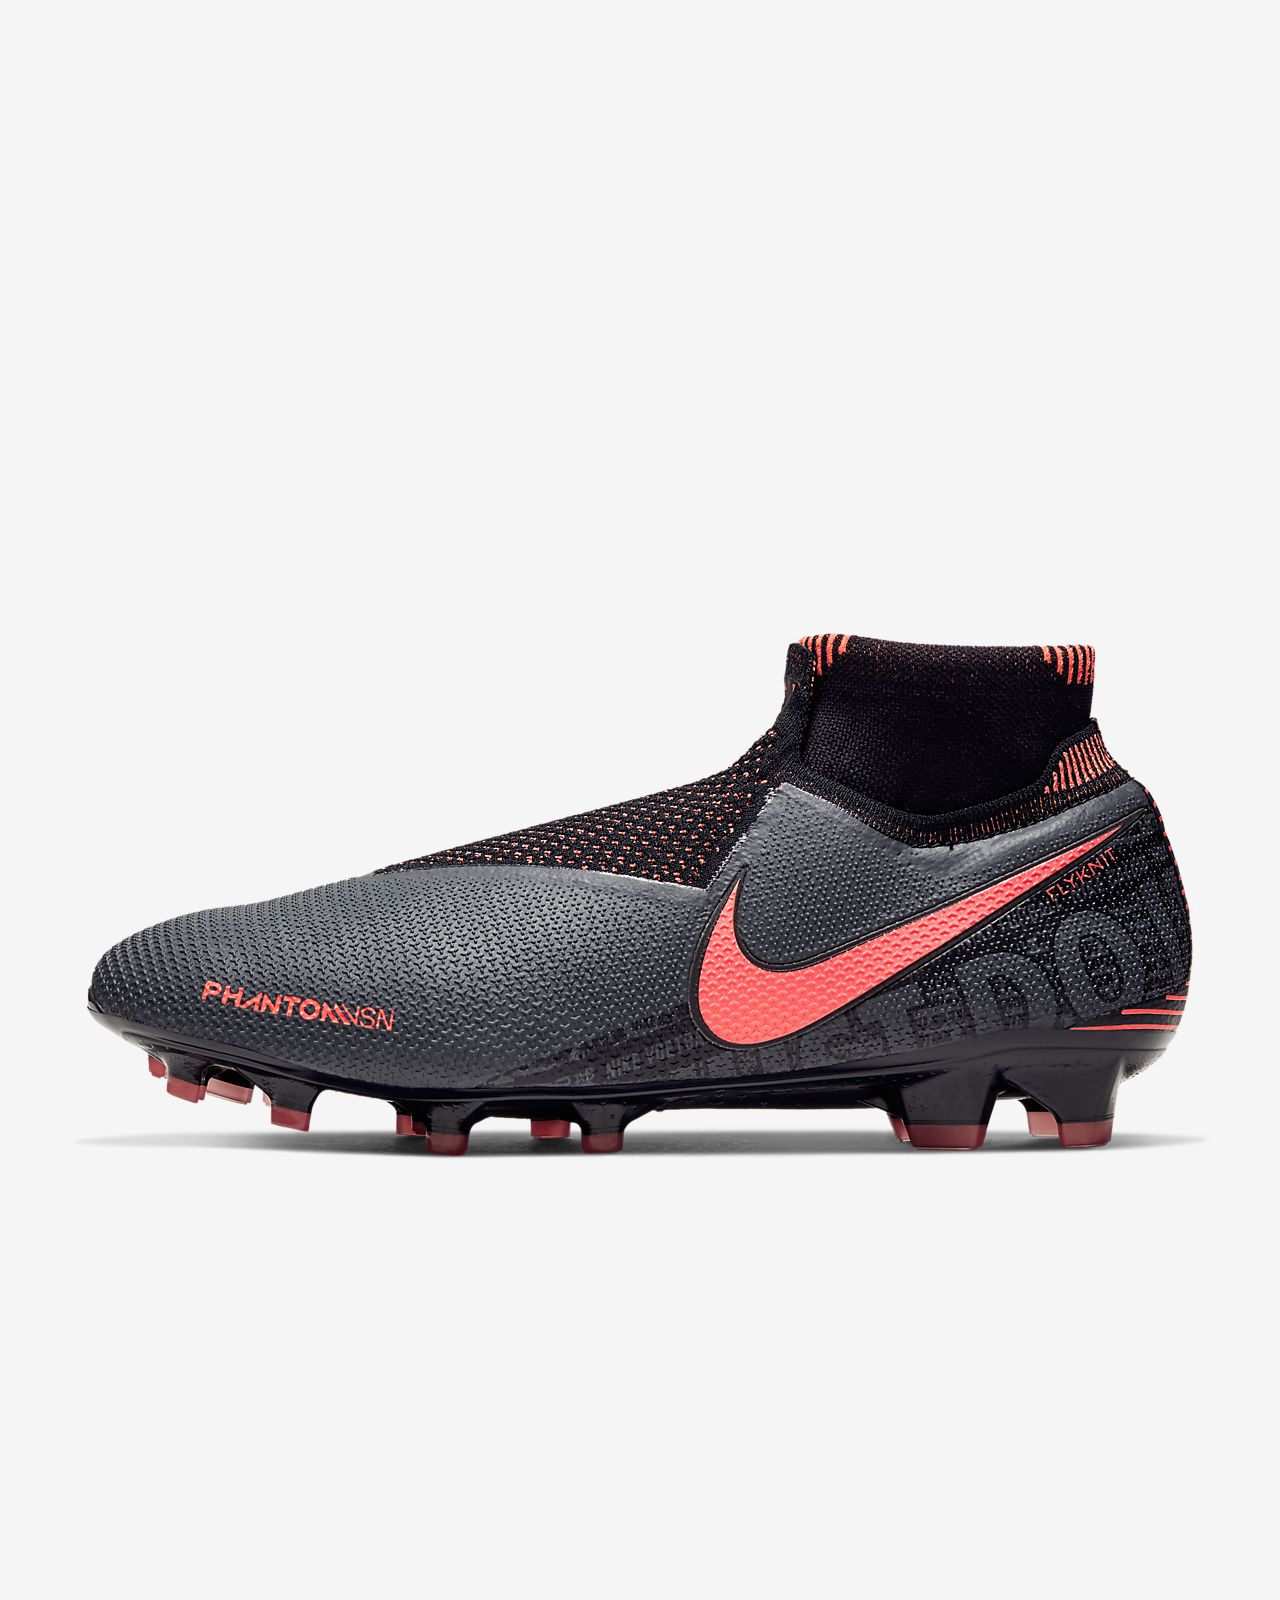 NIKE Official]Nike Phantom Vision Elite Dynamic Fit FG Firm-Ground Soccer  Cleat.Online store (mail order site)